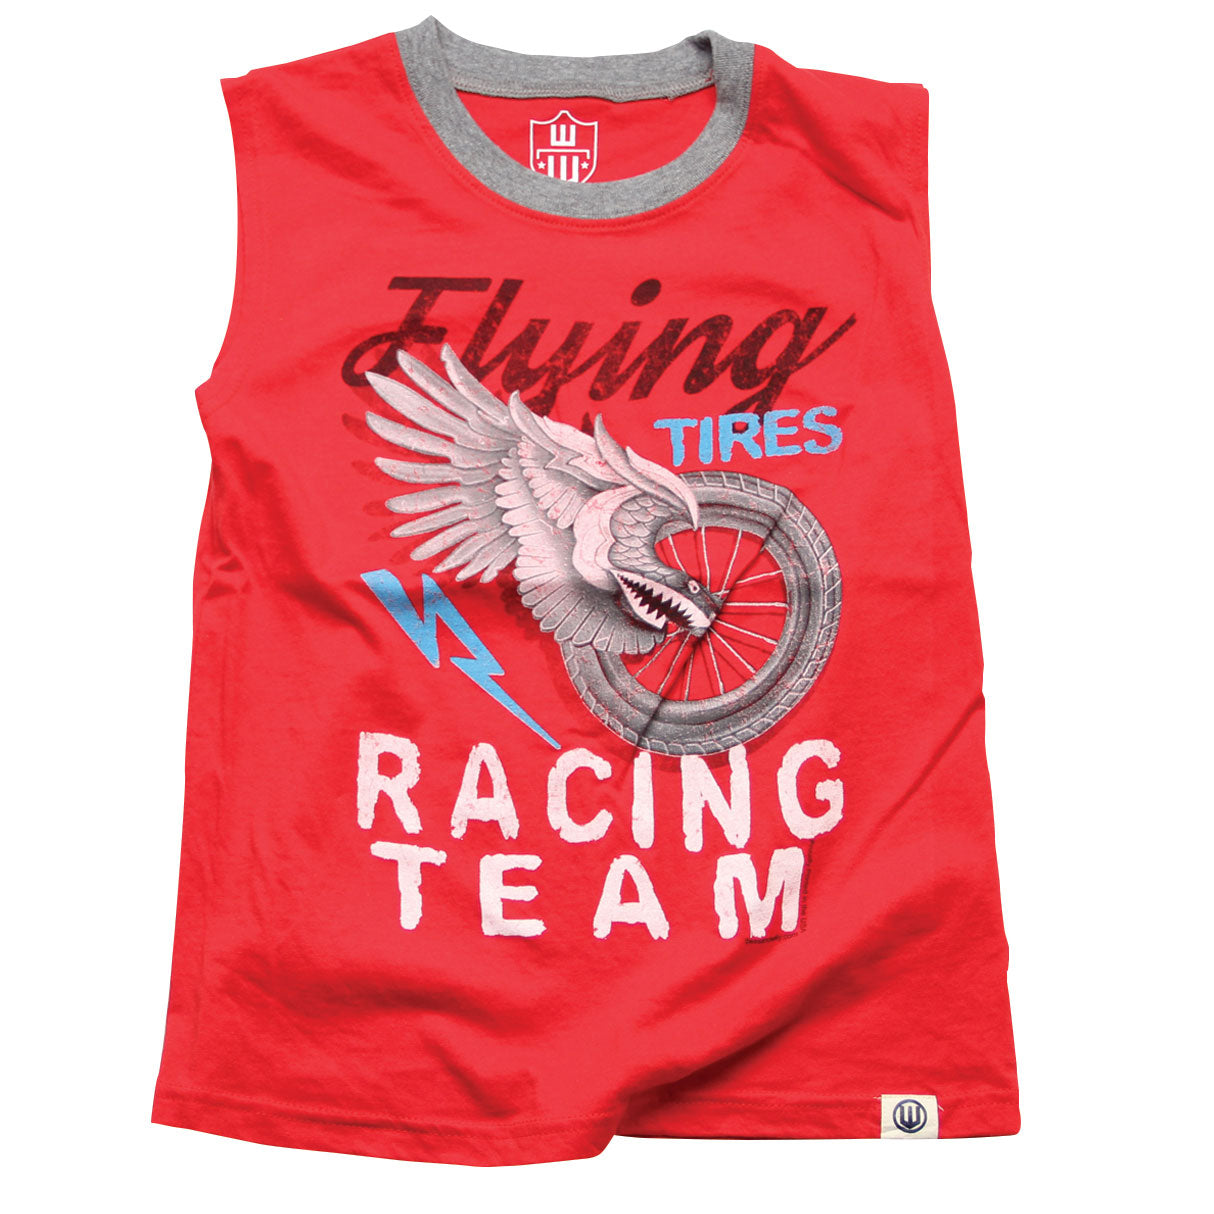 Boys Flying Tires Muscle Tee by Wes and Willy